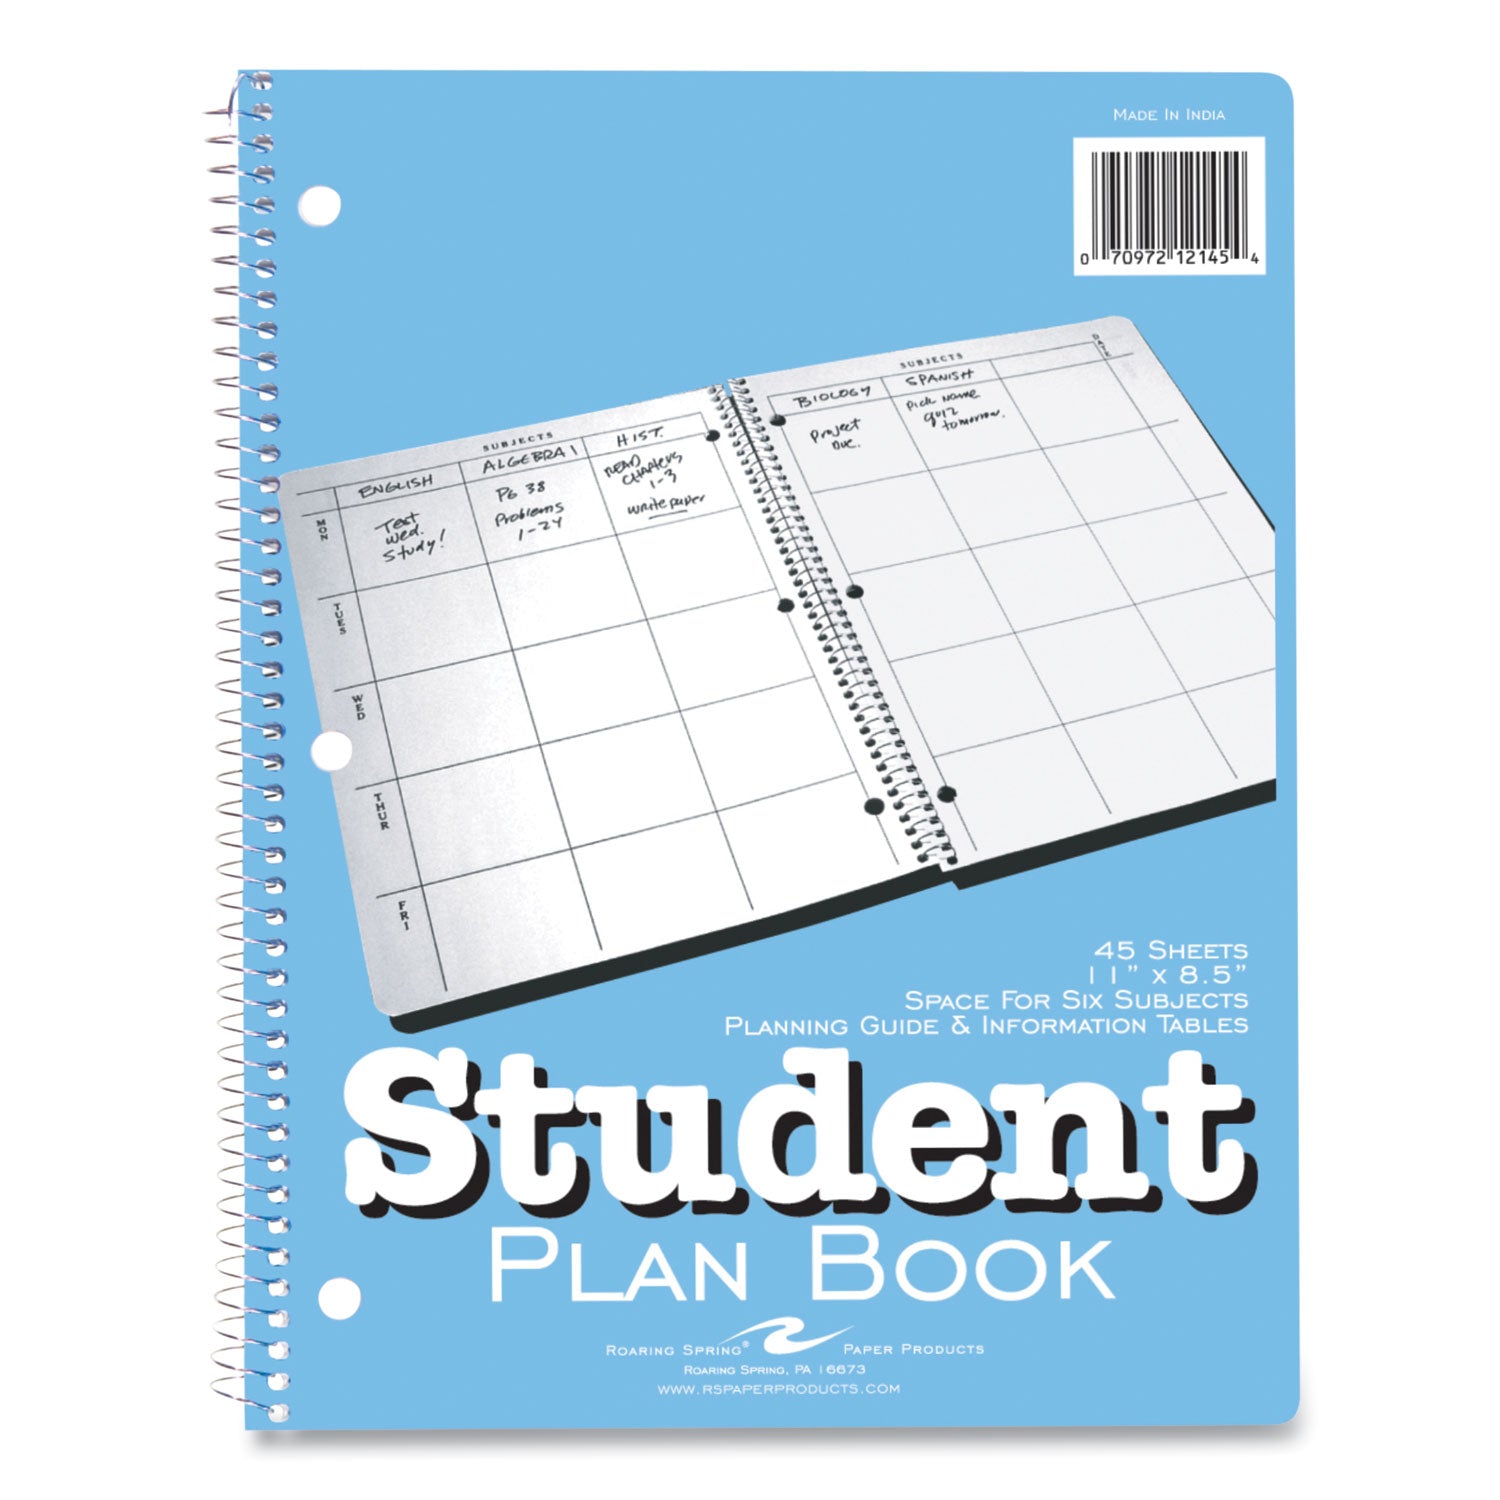 student-plan-book-40-weeks-six-subject-day-blue-white-cover-100-11-x-85-sheets_roa12145 - 1